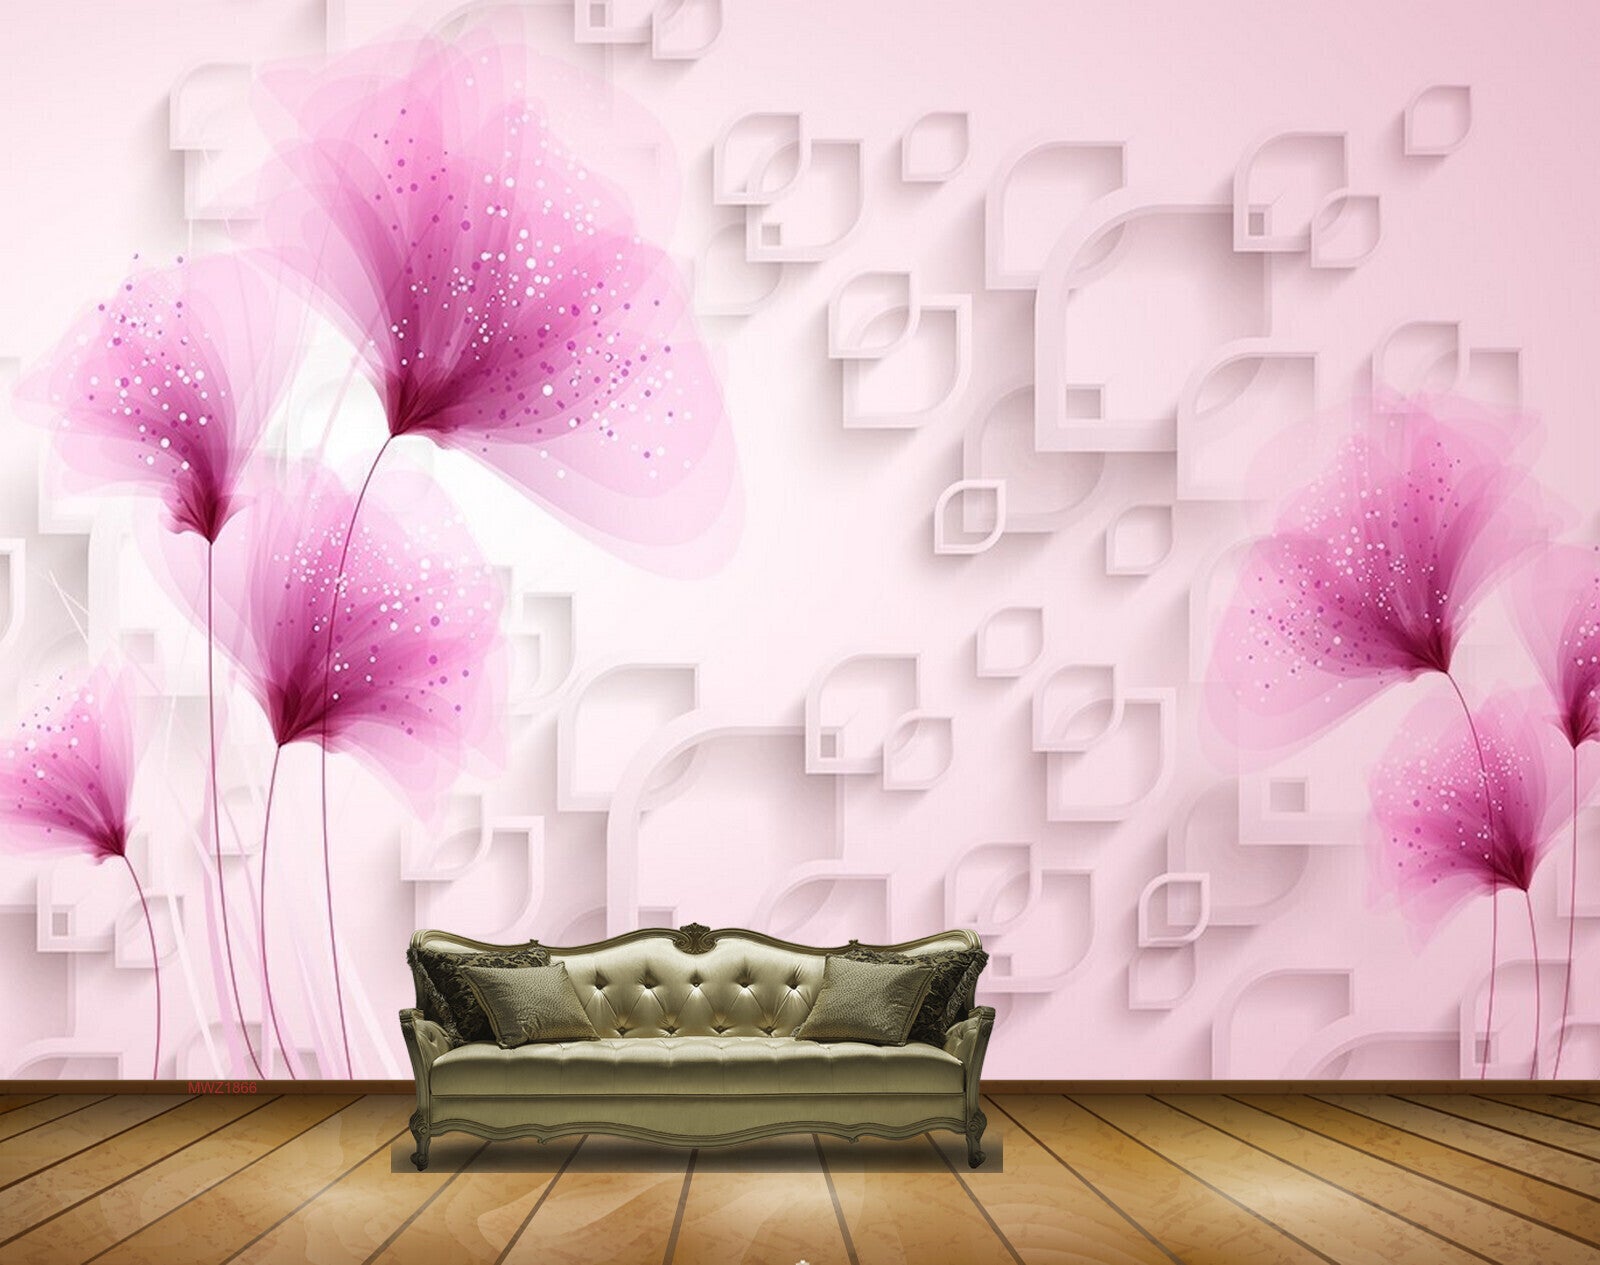 Antique Wallpaper | Buy Latest 3D Wallpapers Upto 70% Off